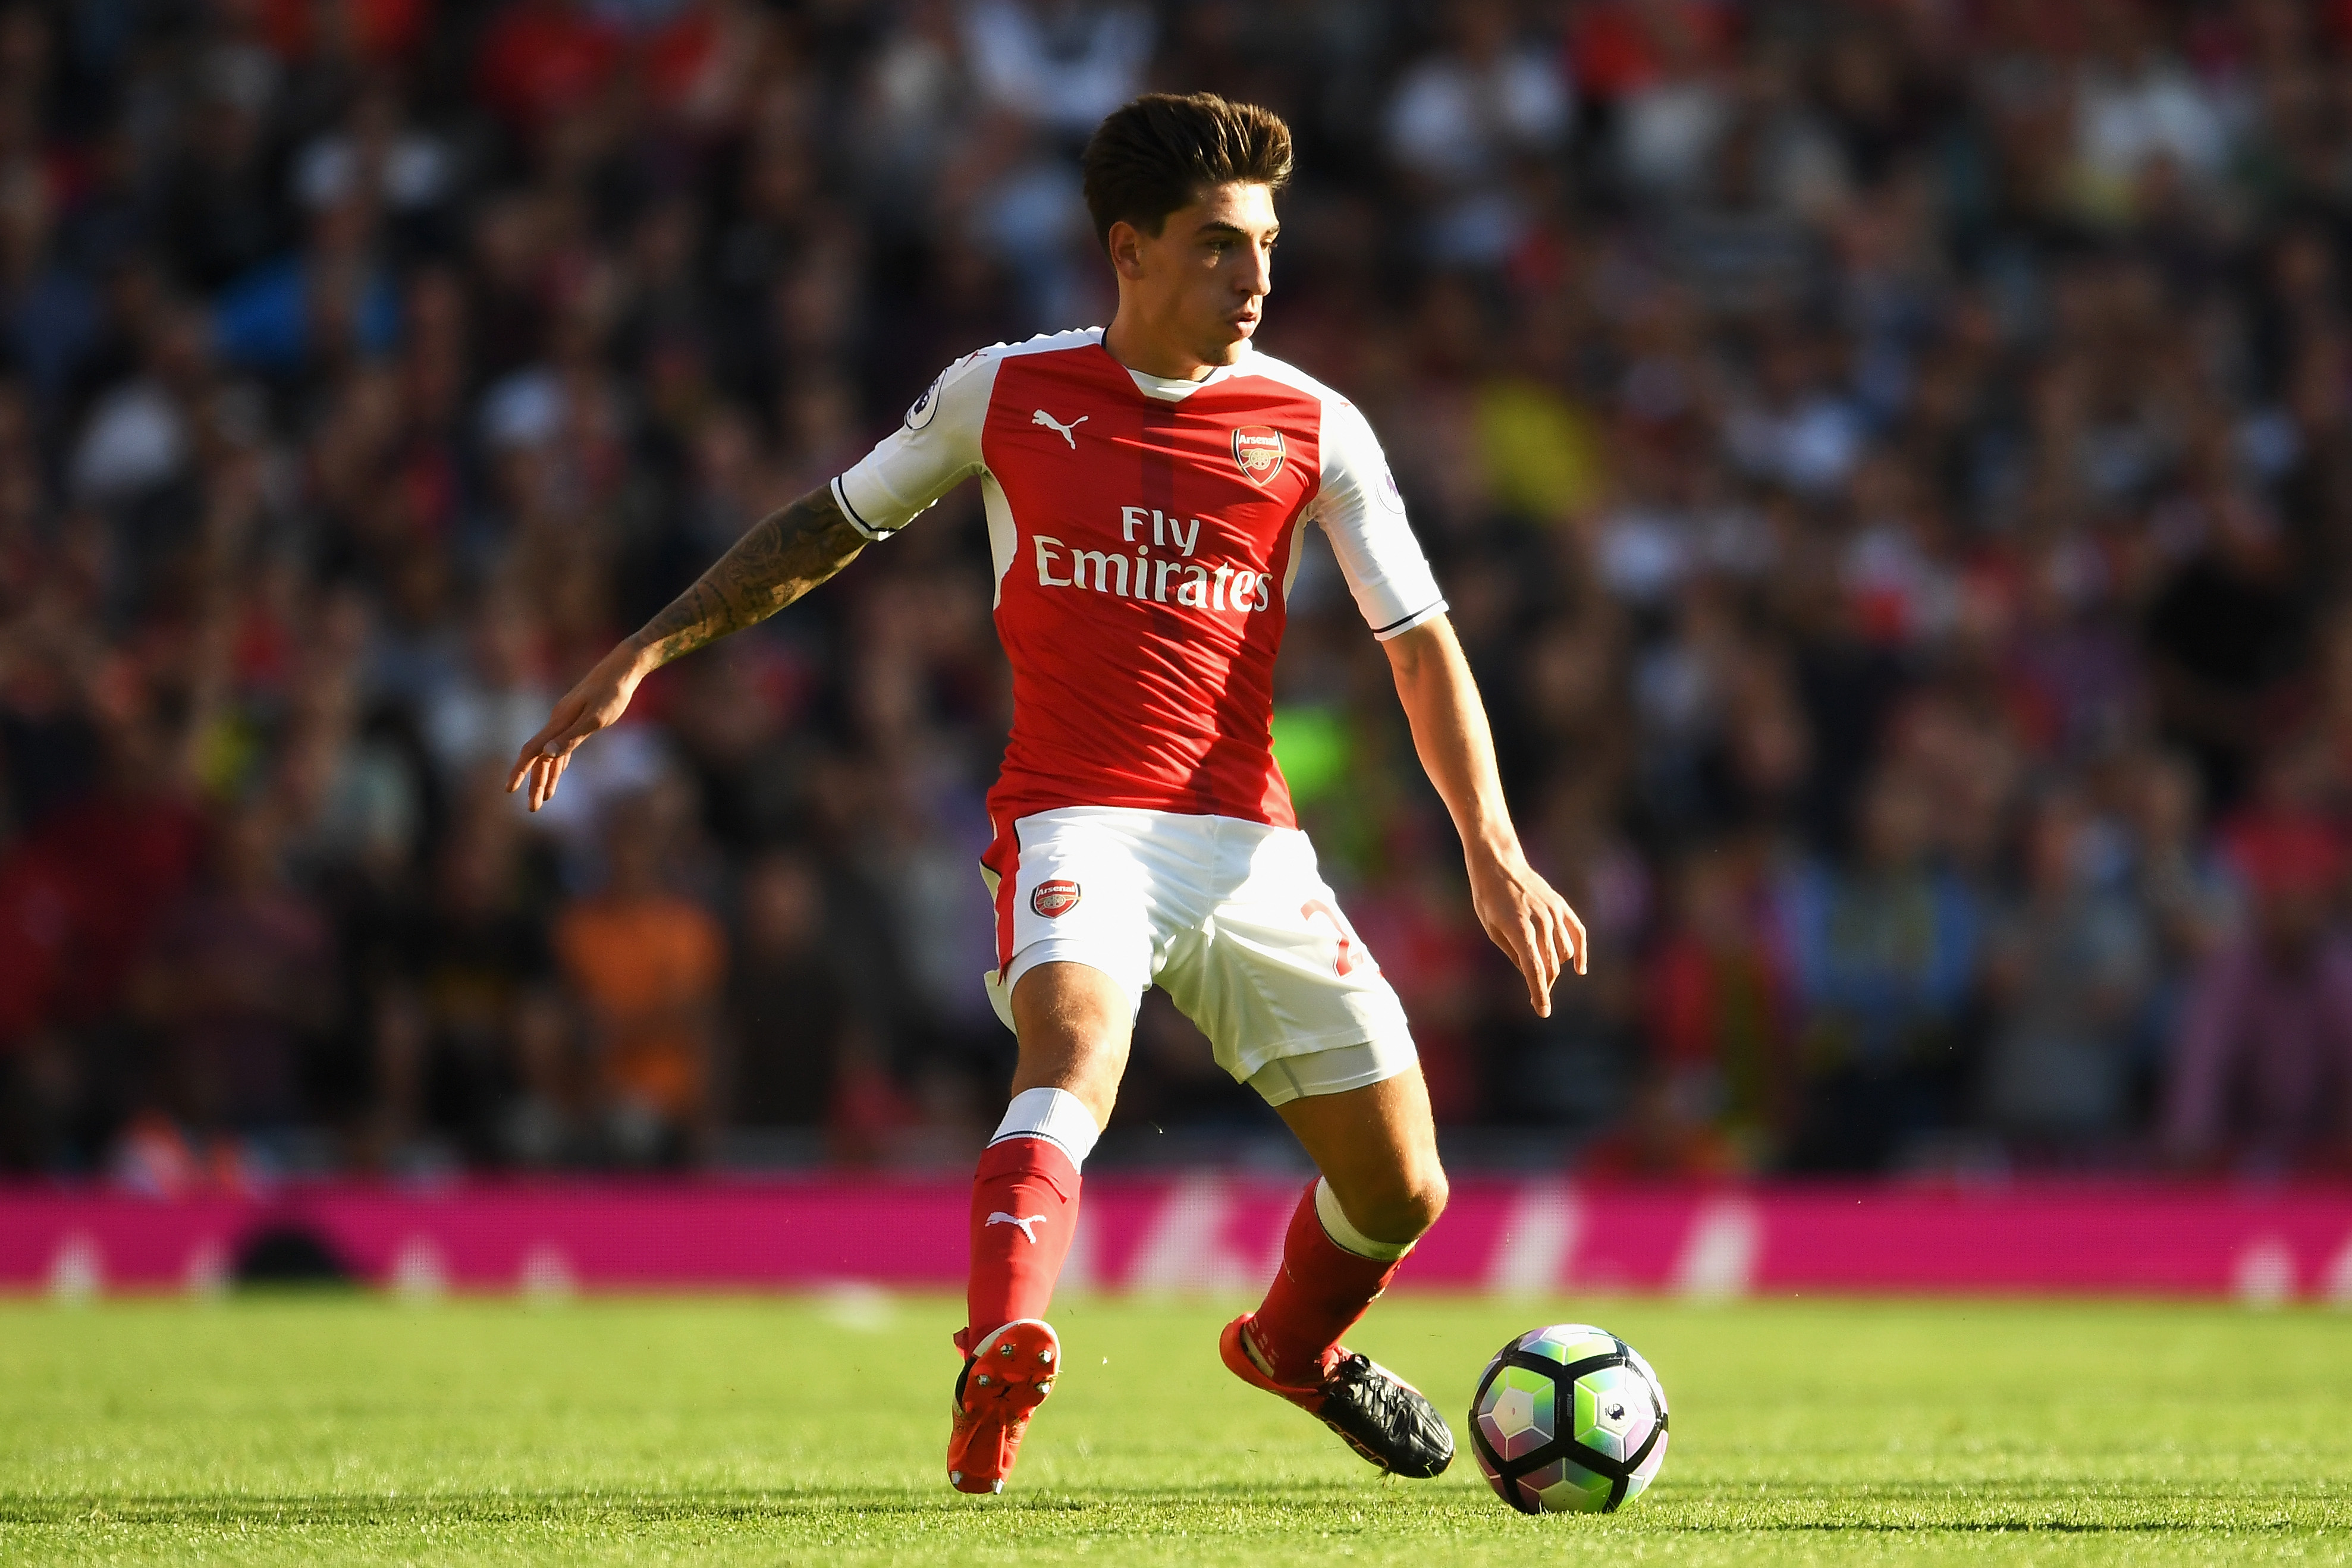 LONDON, ENGLAND - AUGUST 14:  Hector Bellerin of Arsenal in action during the Premier League match between Arsenal and Liverpool at Emirates Stadium on August 14, 2016 in London, England.  (Photo by Mike Hewitt/Getty Images)